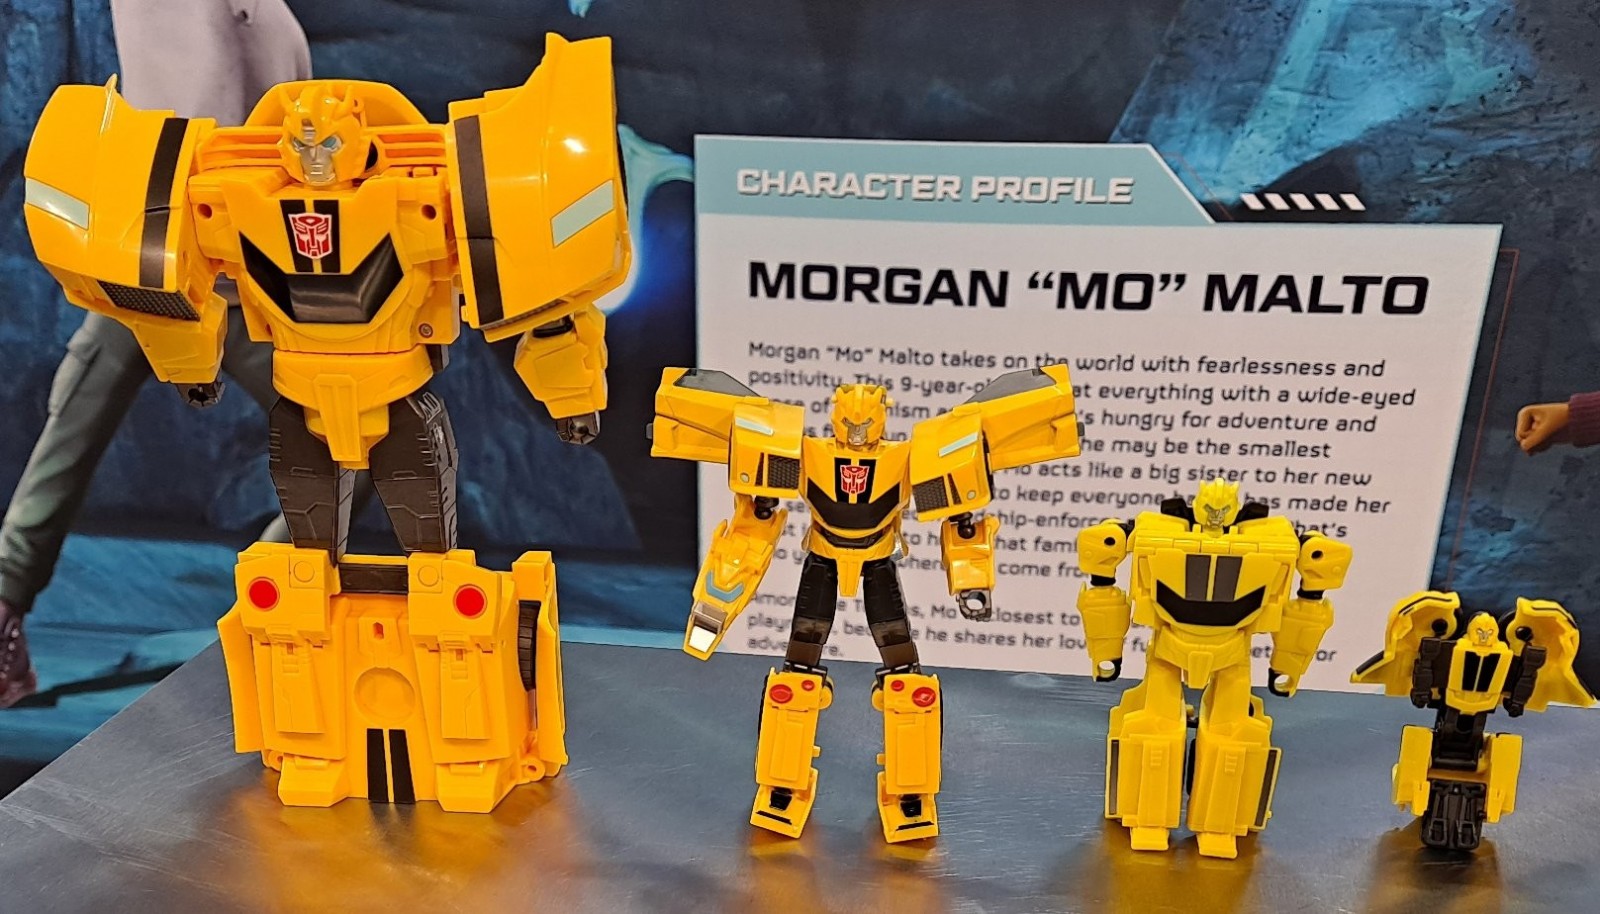 Transformers News: We Now Know all 7 Earthspark Deluxes Needed to Build the Mandroid BAF Figure